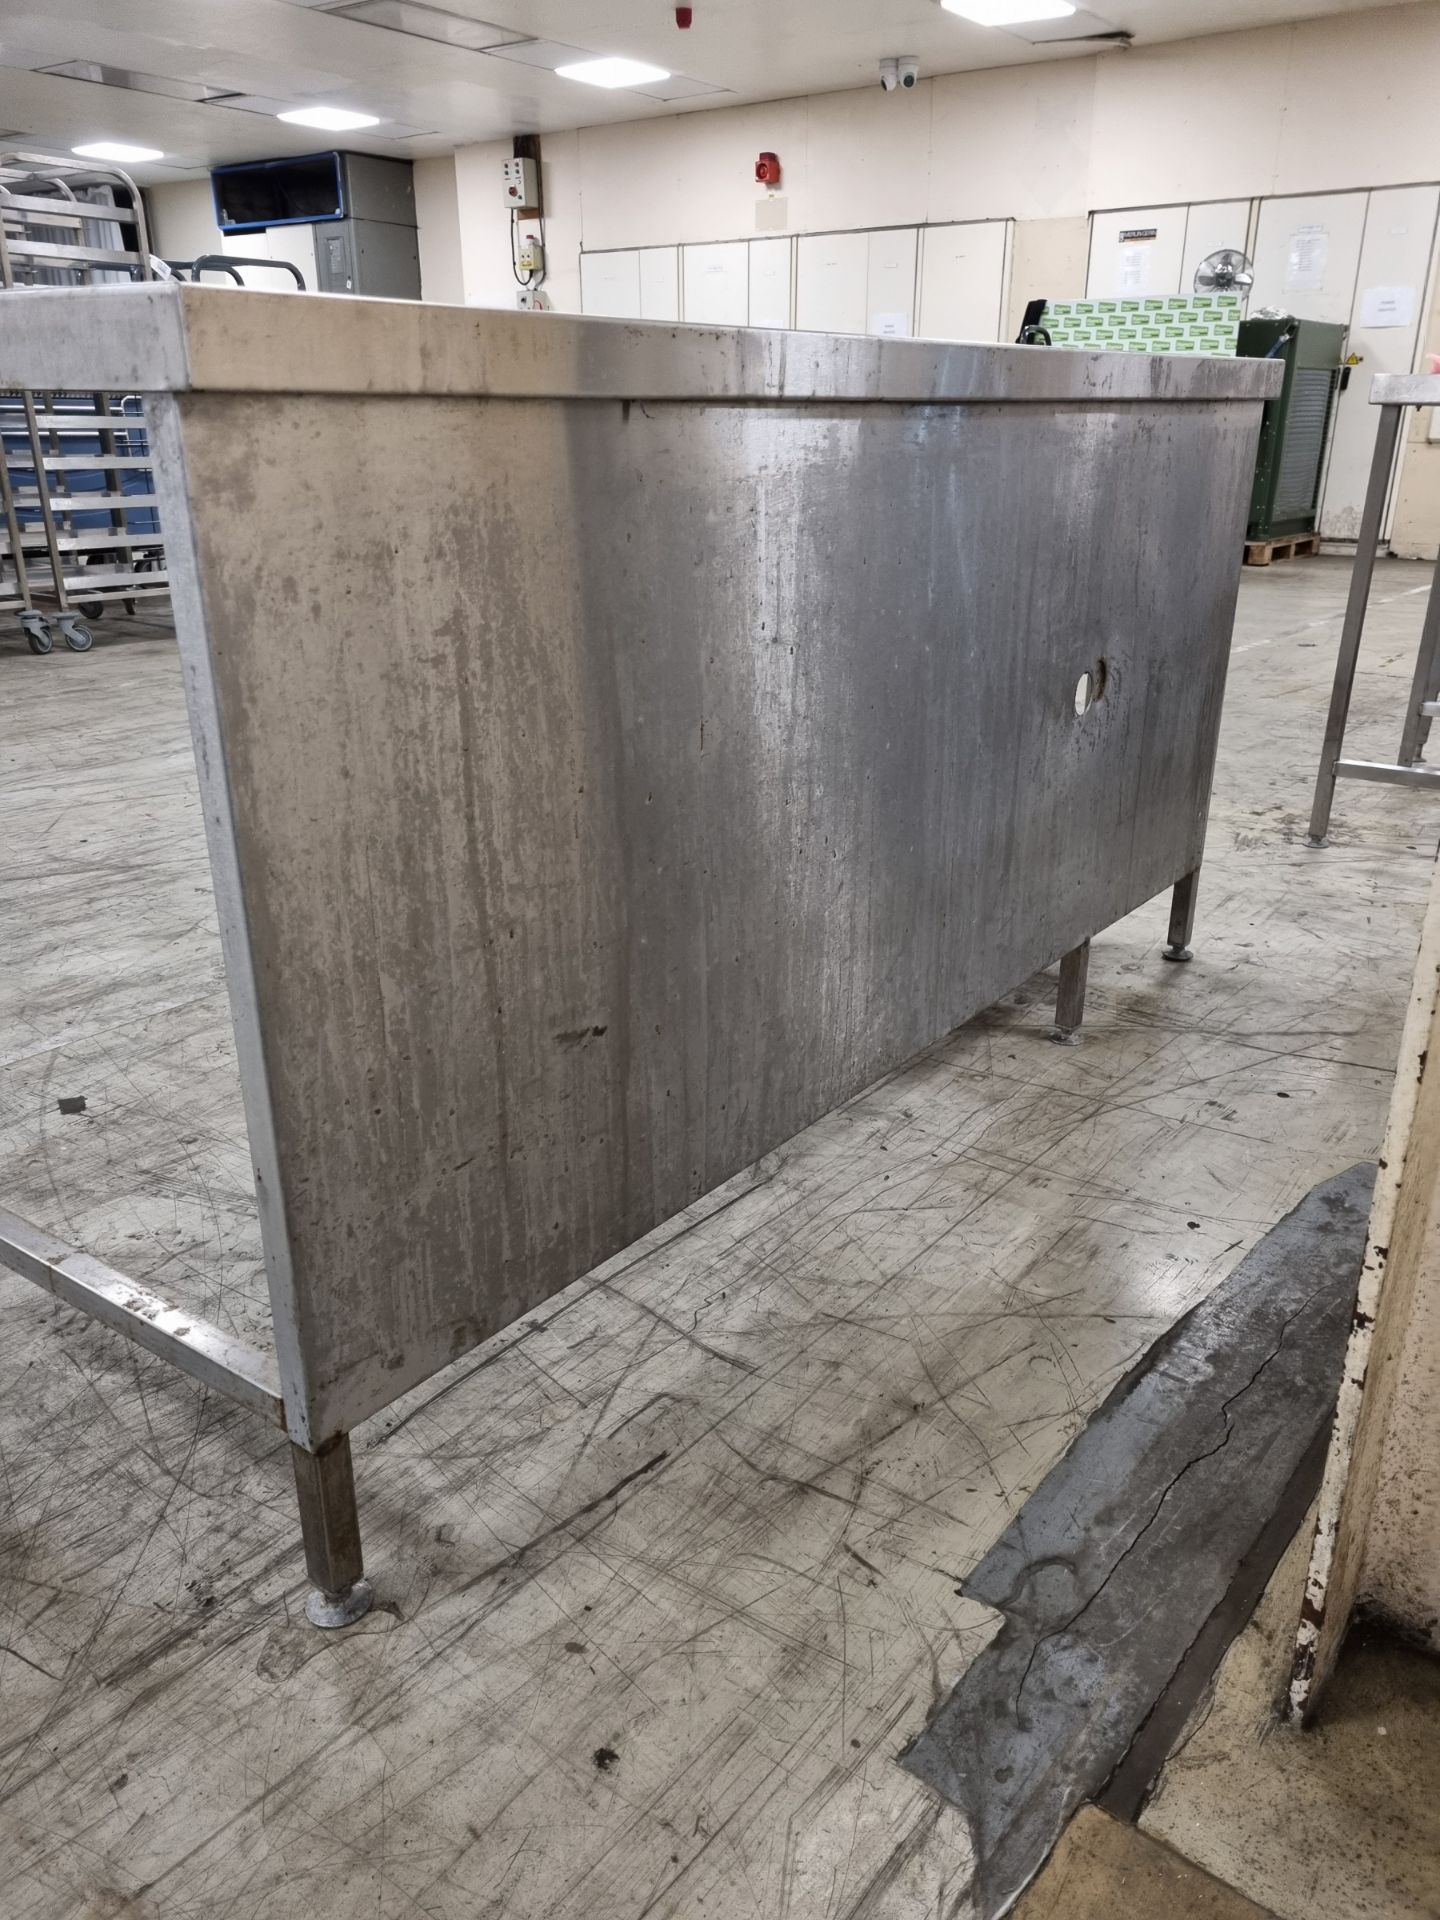 Stainless steel countertop with shelf and back wall - 65x180x92cm - Image 6 of 7